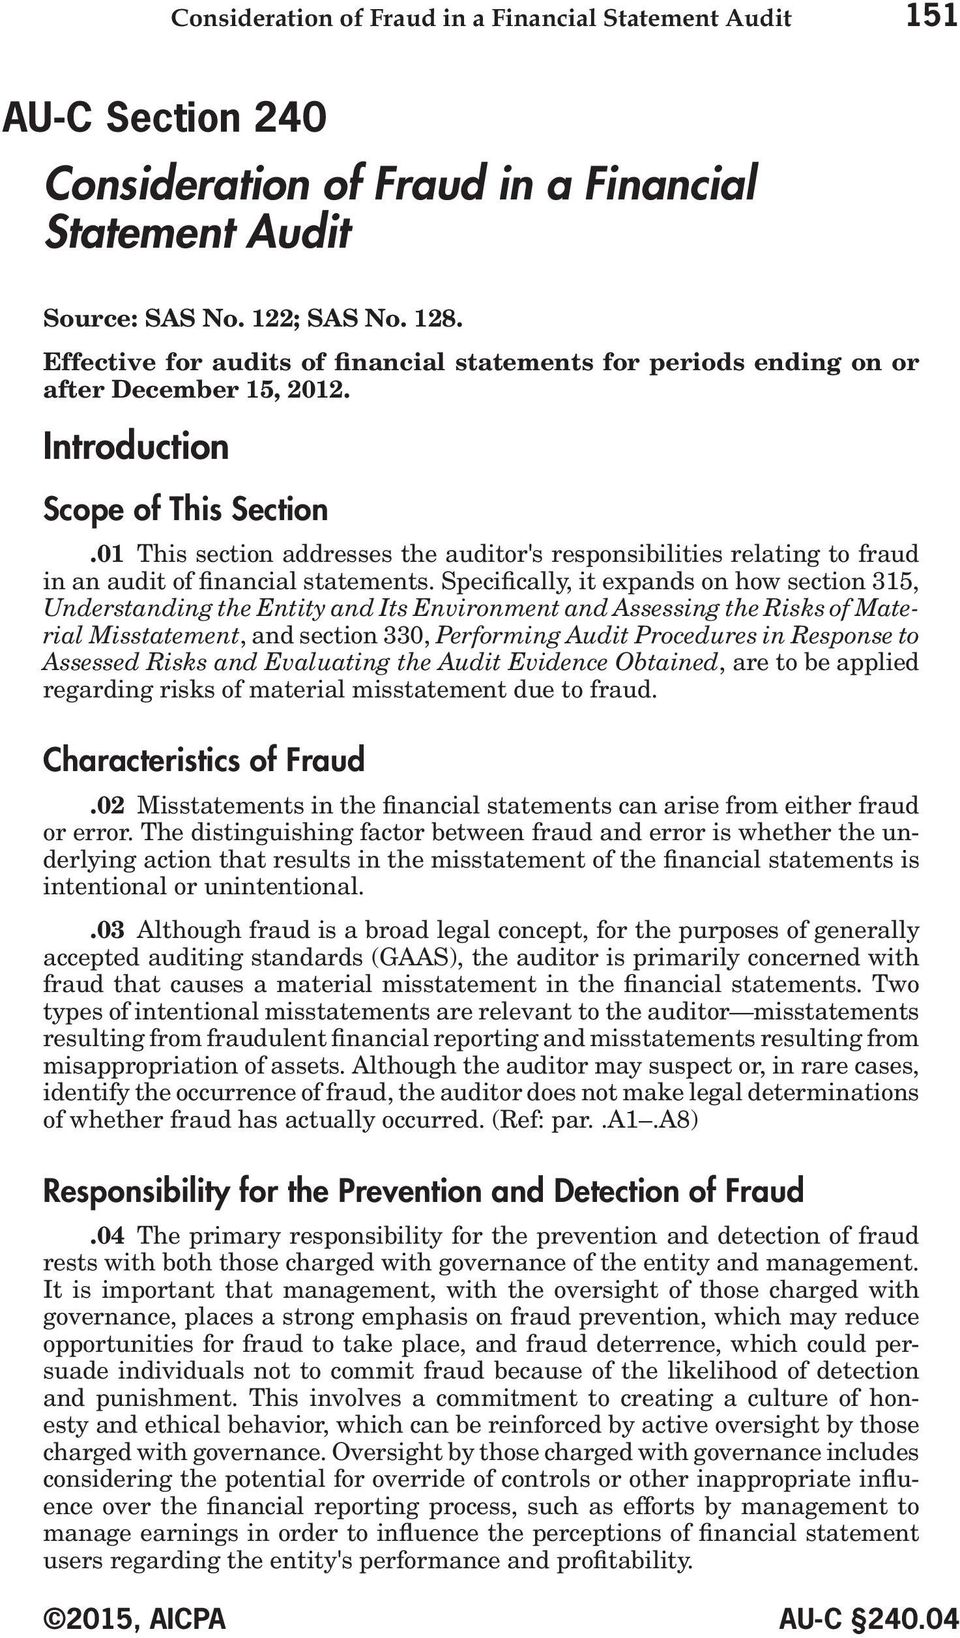 01 This section addresses the auditor's responsibilities relating to fraud in an audit of financial statements.